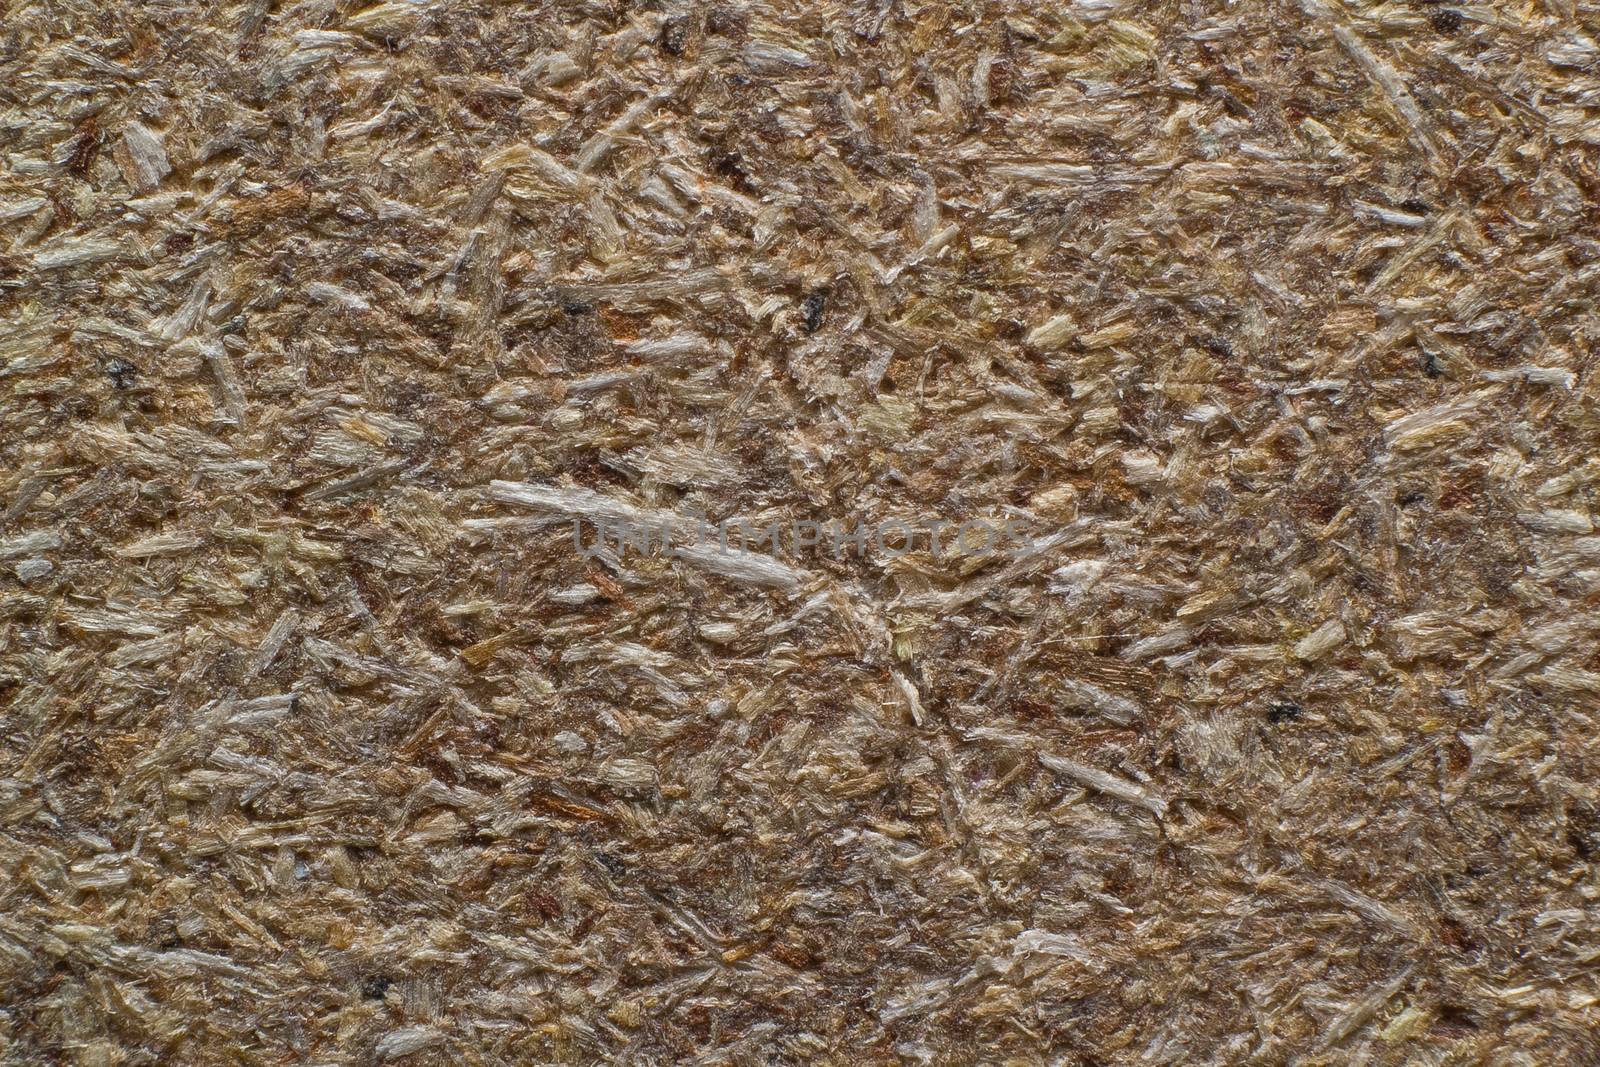 Detailed texture of a plywood